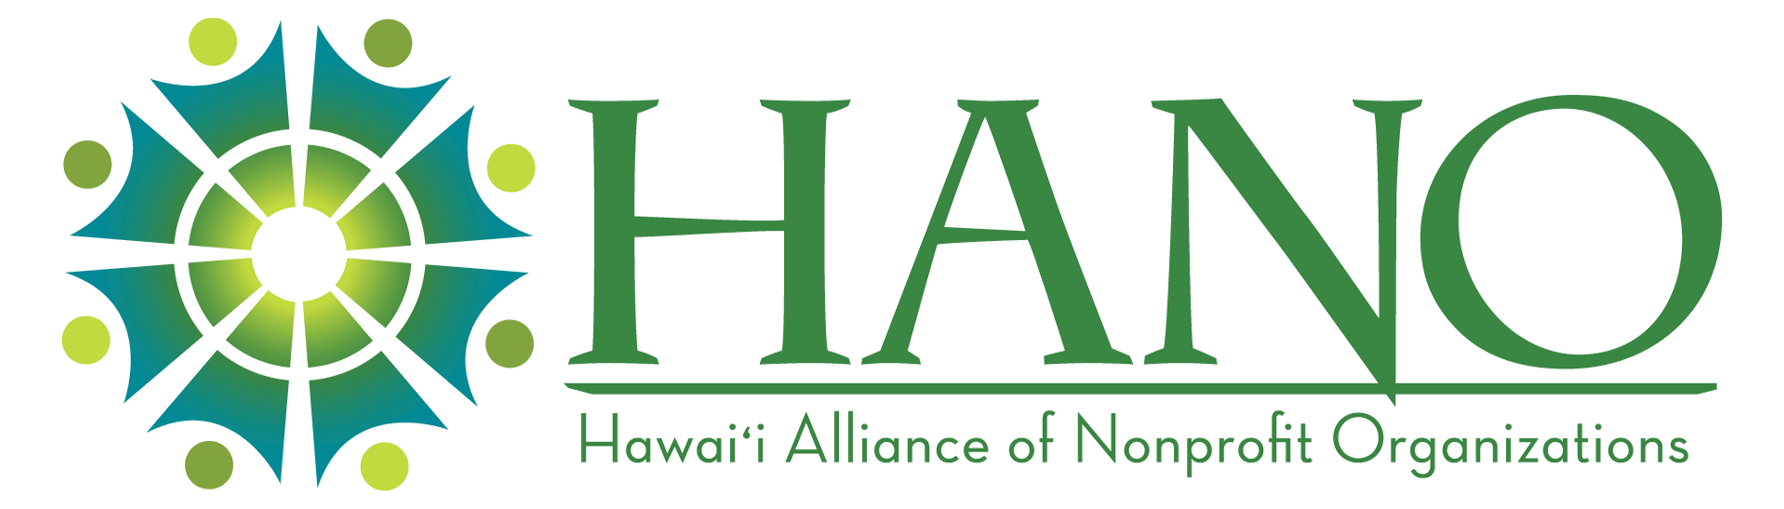 Link to Hawaii Alliance of Nonprofit Organizations